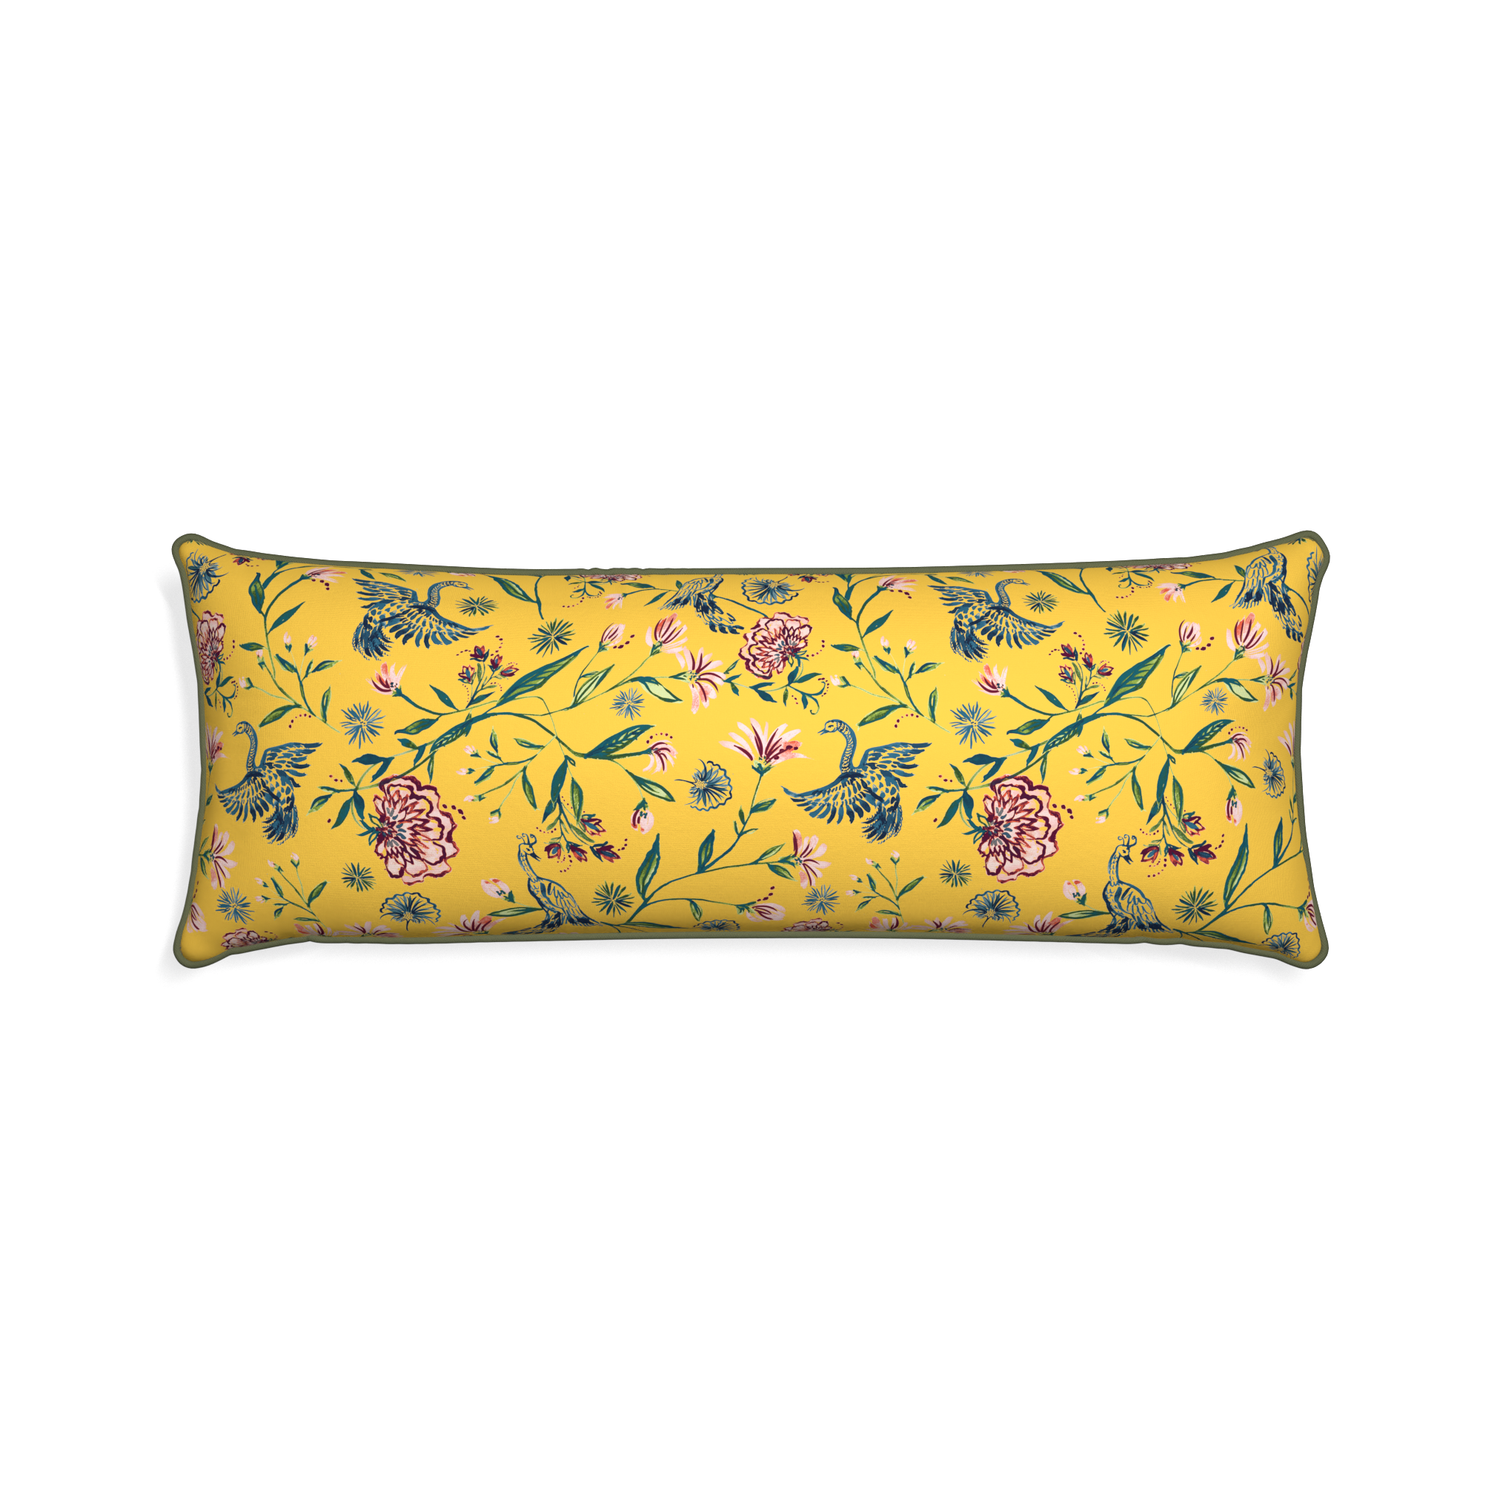 Xl-lumbar daphne canary custom pillow with f piping on white background